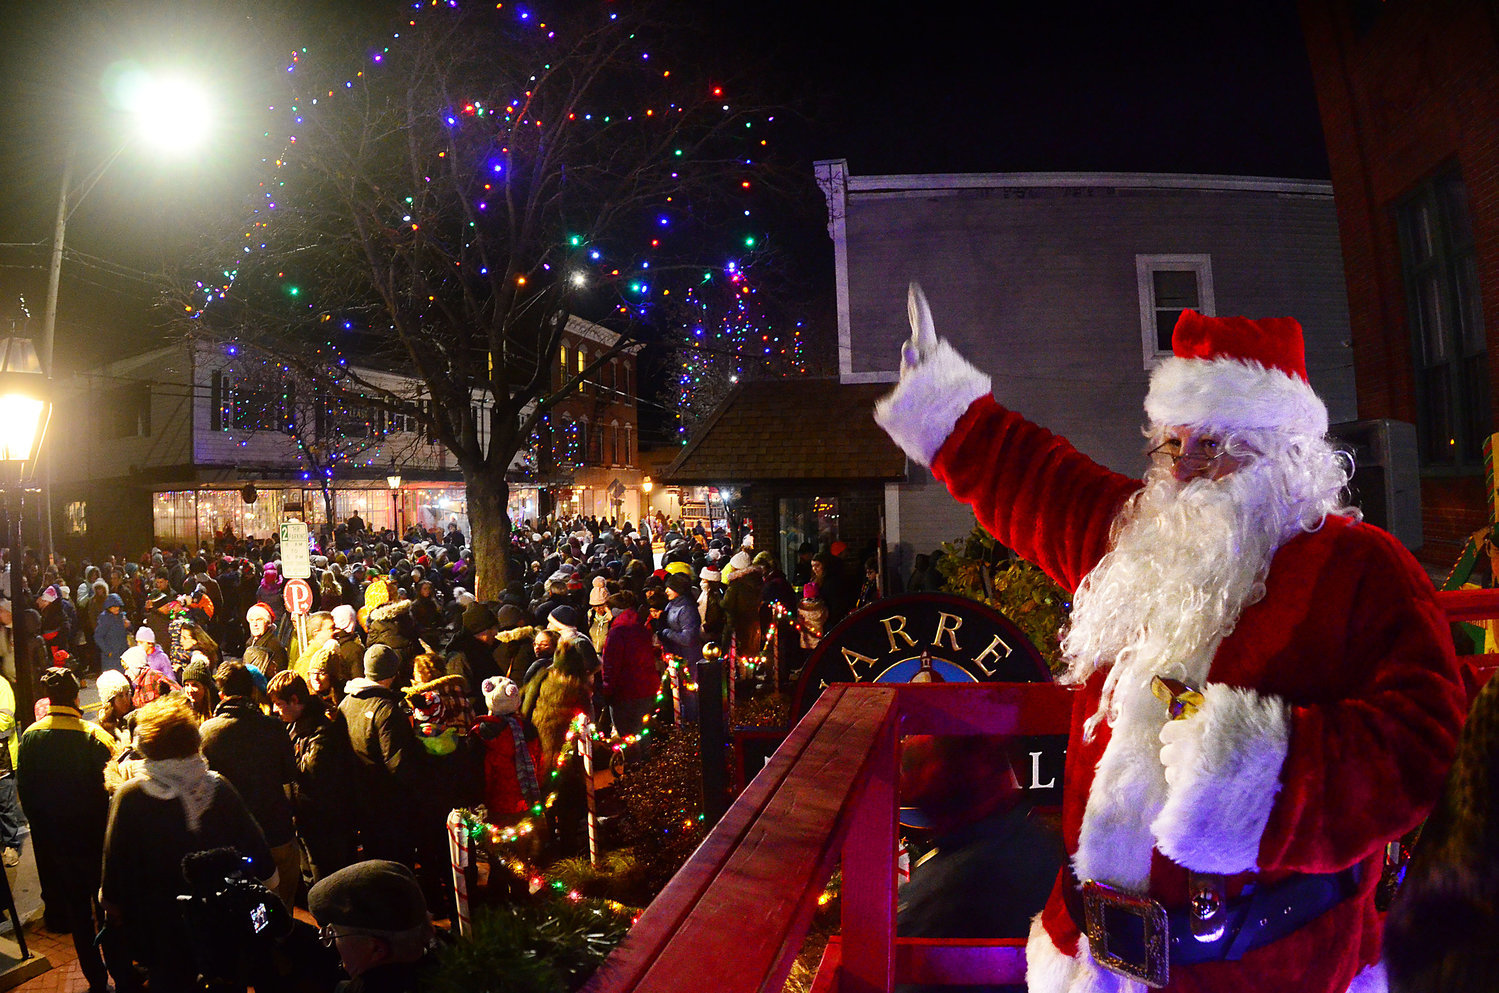 The Warren Holiday Festival usually draws thousands downtown for the annual lighting the last Friday of November. This year, things will look a good bit different but don't worry: Santa is still coming.